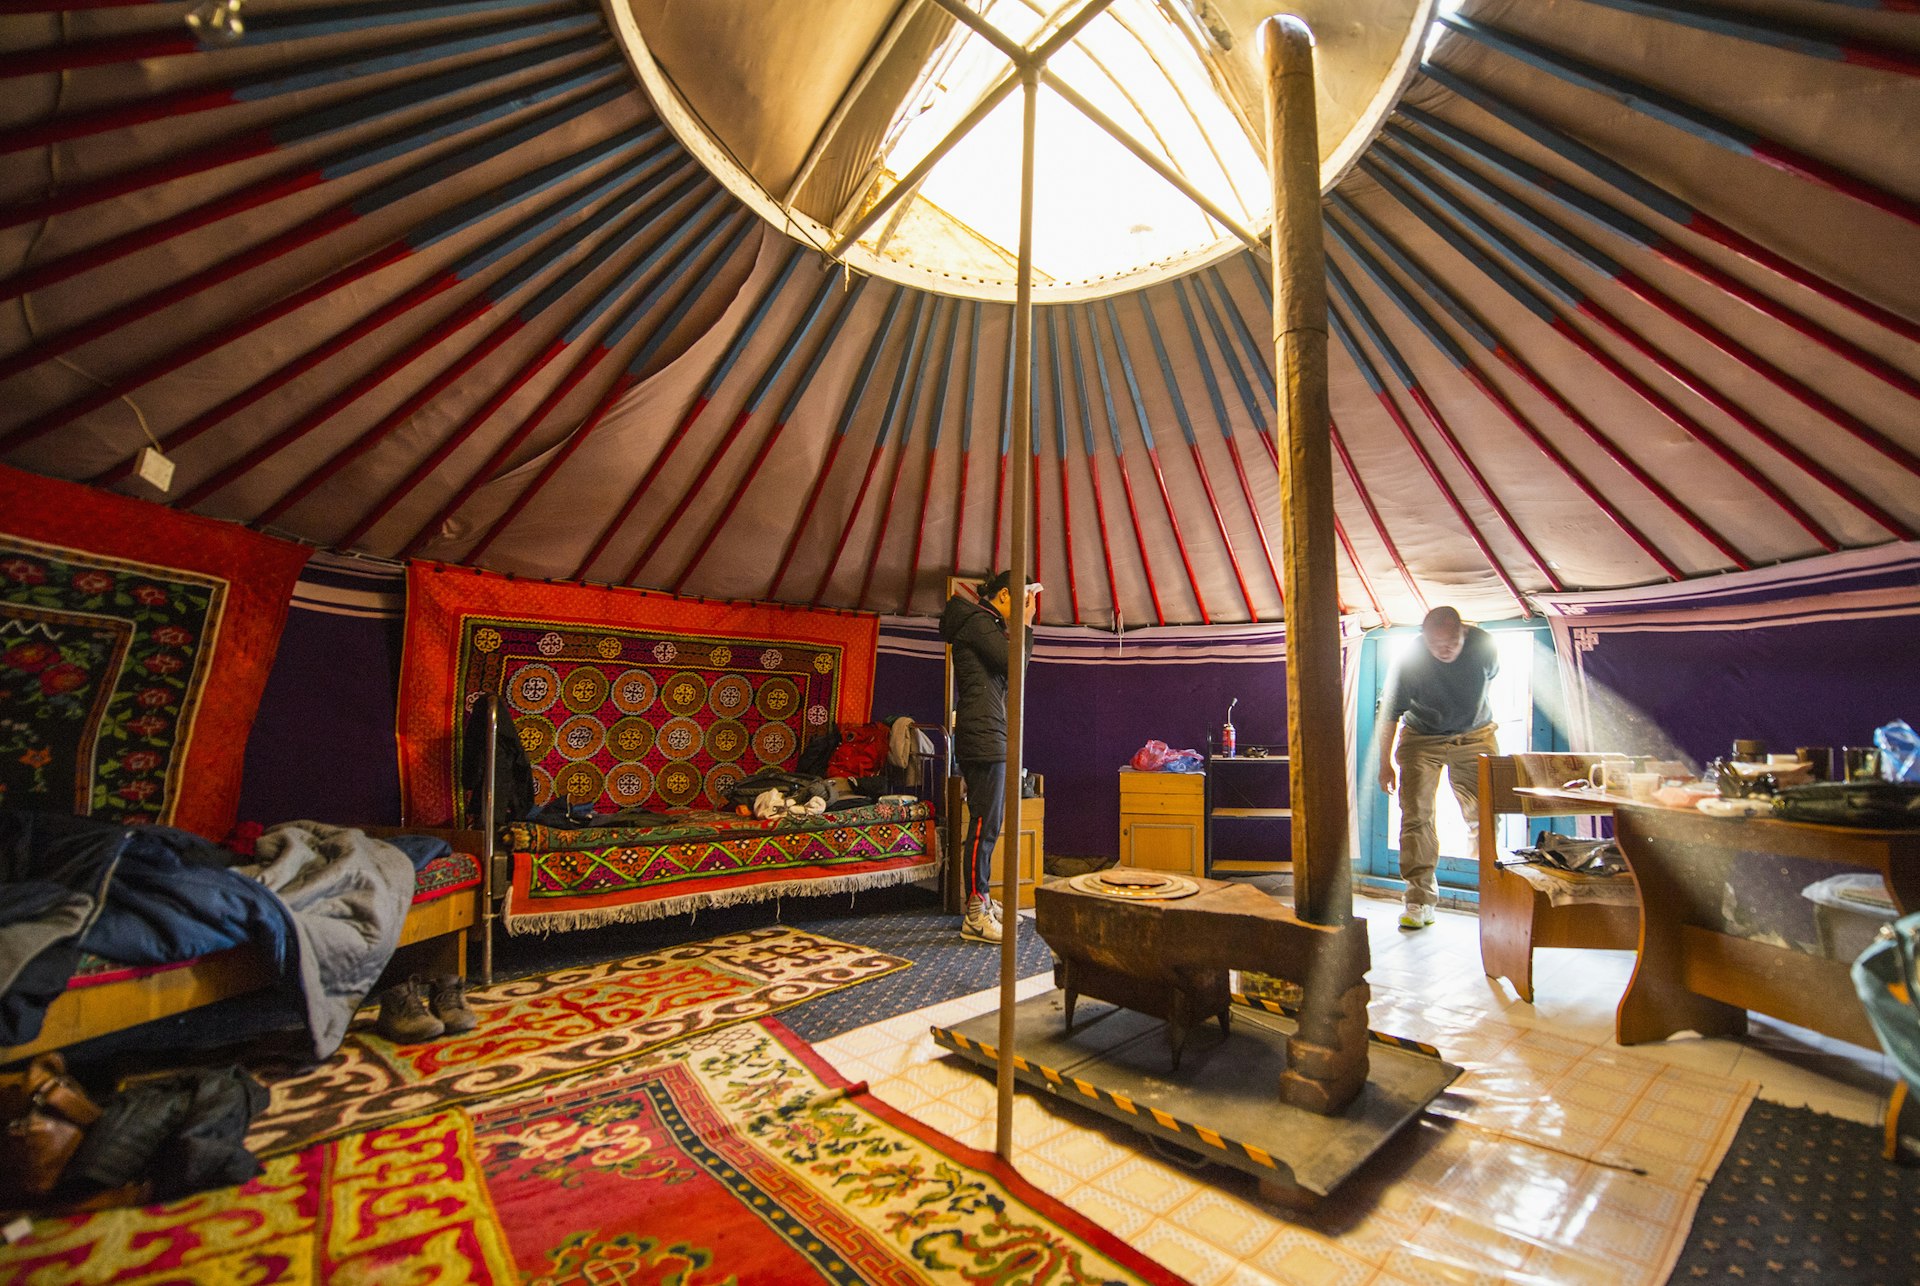 People step inside the doorway of a large round tent with a central opening and many colorful rugs adorning walls and floor